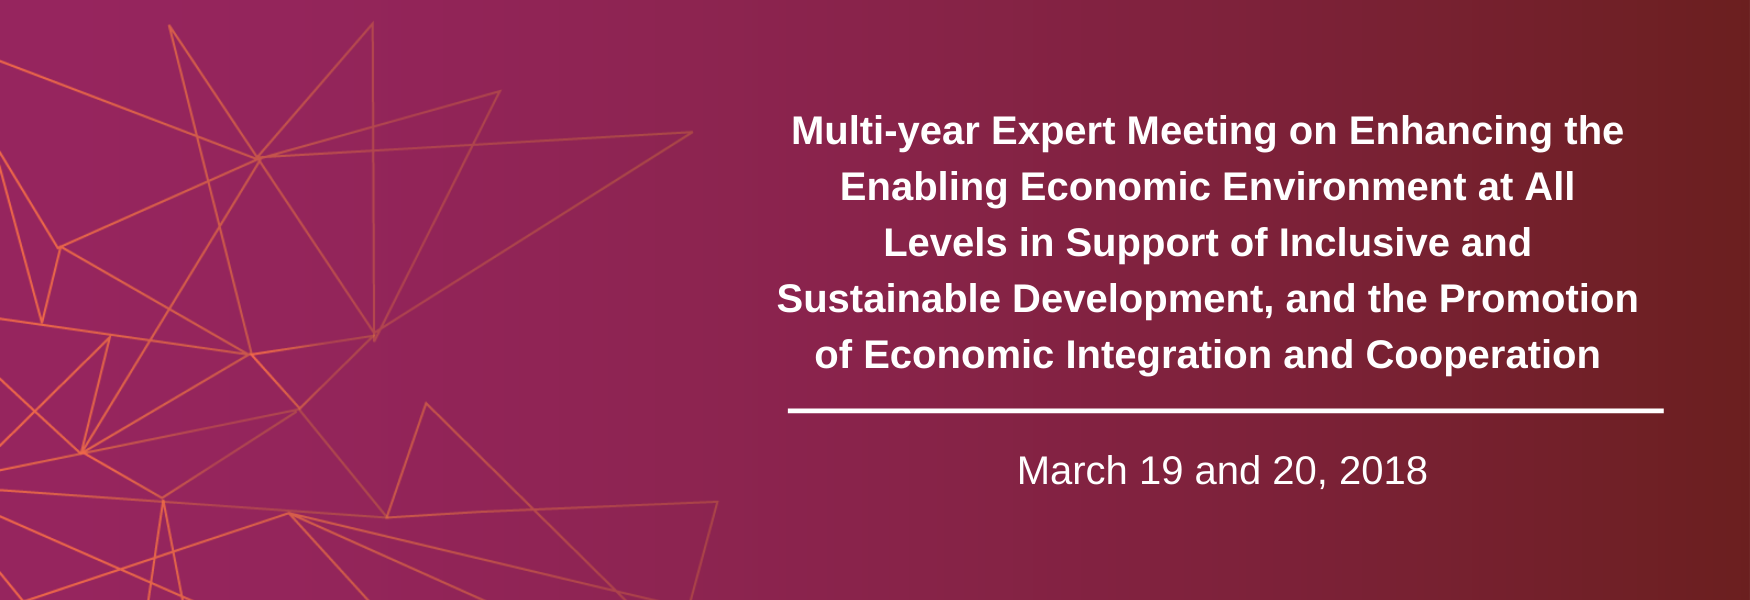 Multi-year Expert Meeting on Enhancing the Enabling Economic Environment at All Levels in Support of Inclusive and Sustainable Development, and the Promotion of Economic Integration and Cooperation